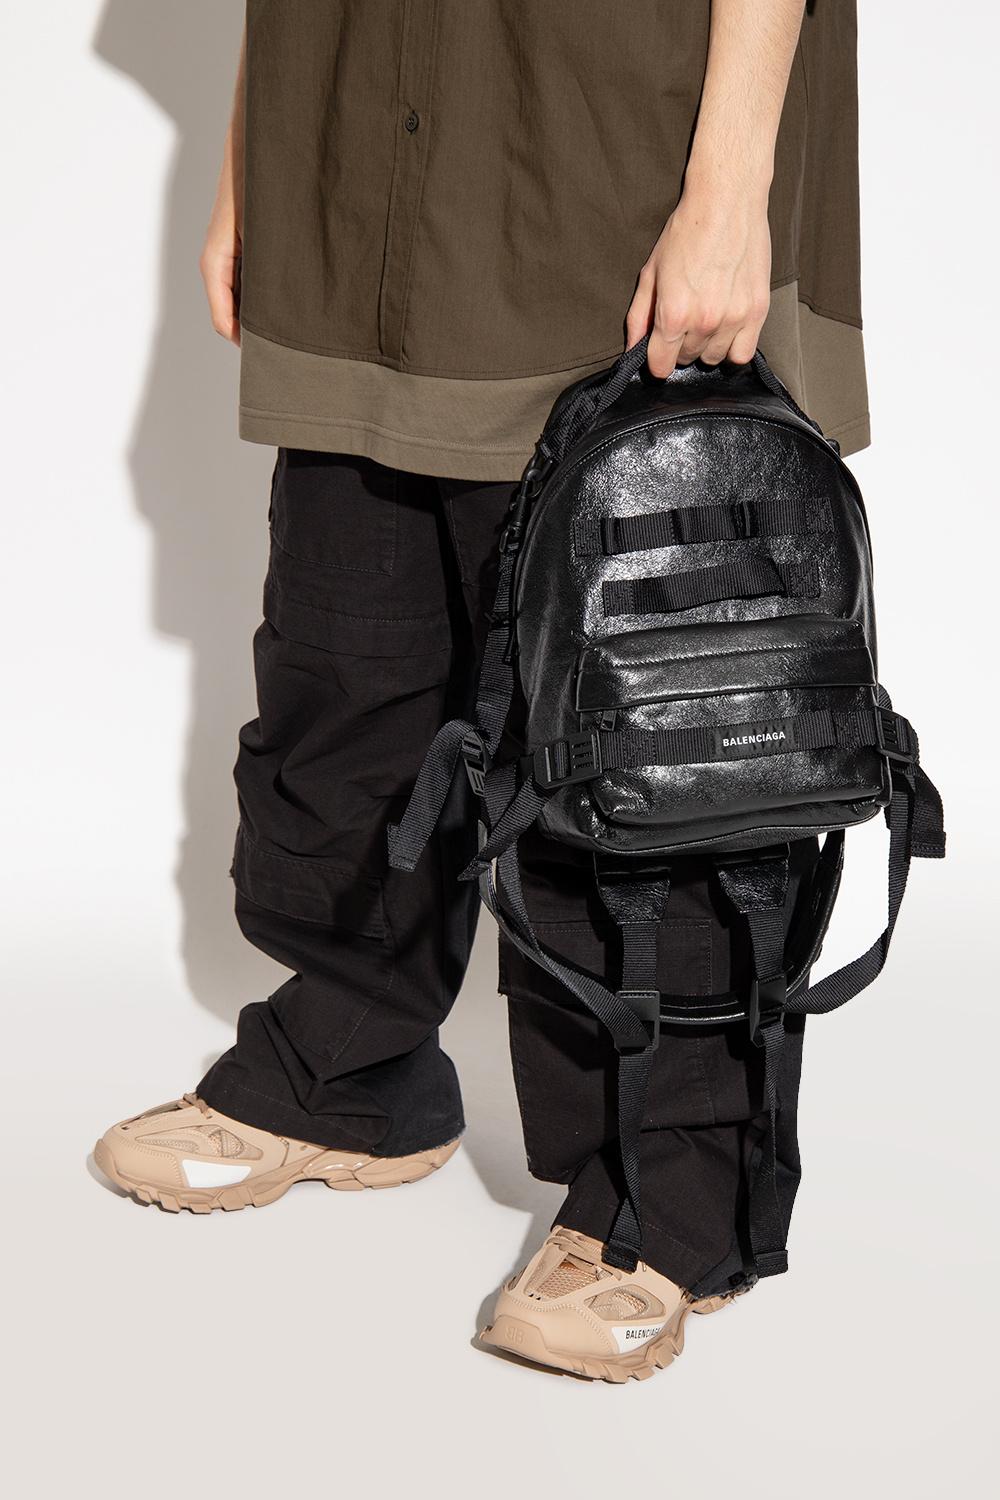 Balenciaga Leather 'army Small' Backpack in Black for Men | Lyst Australia